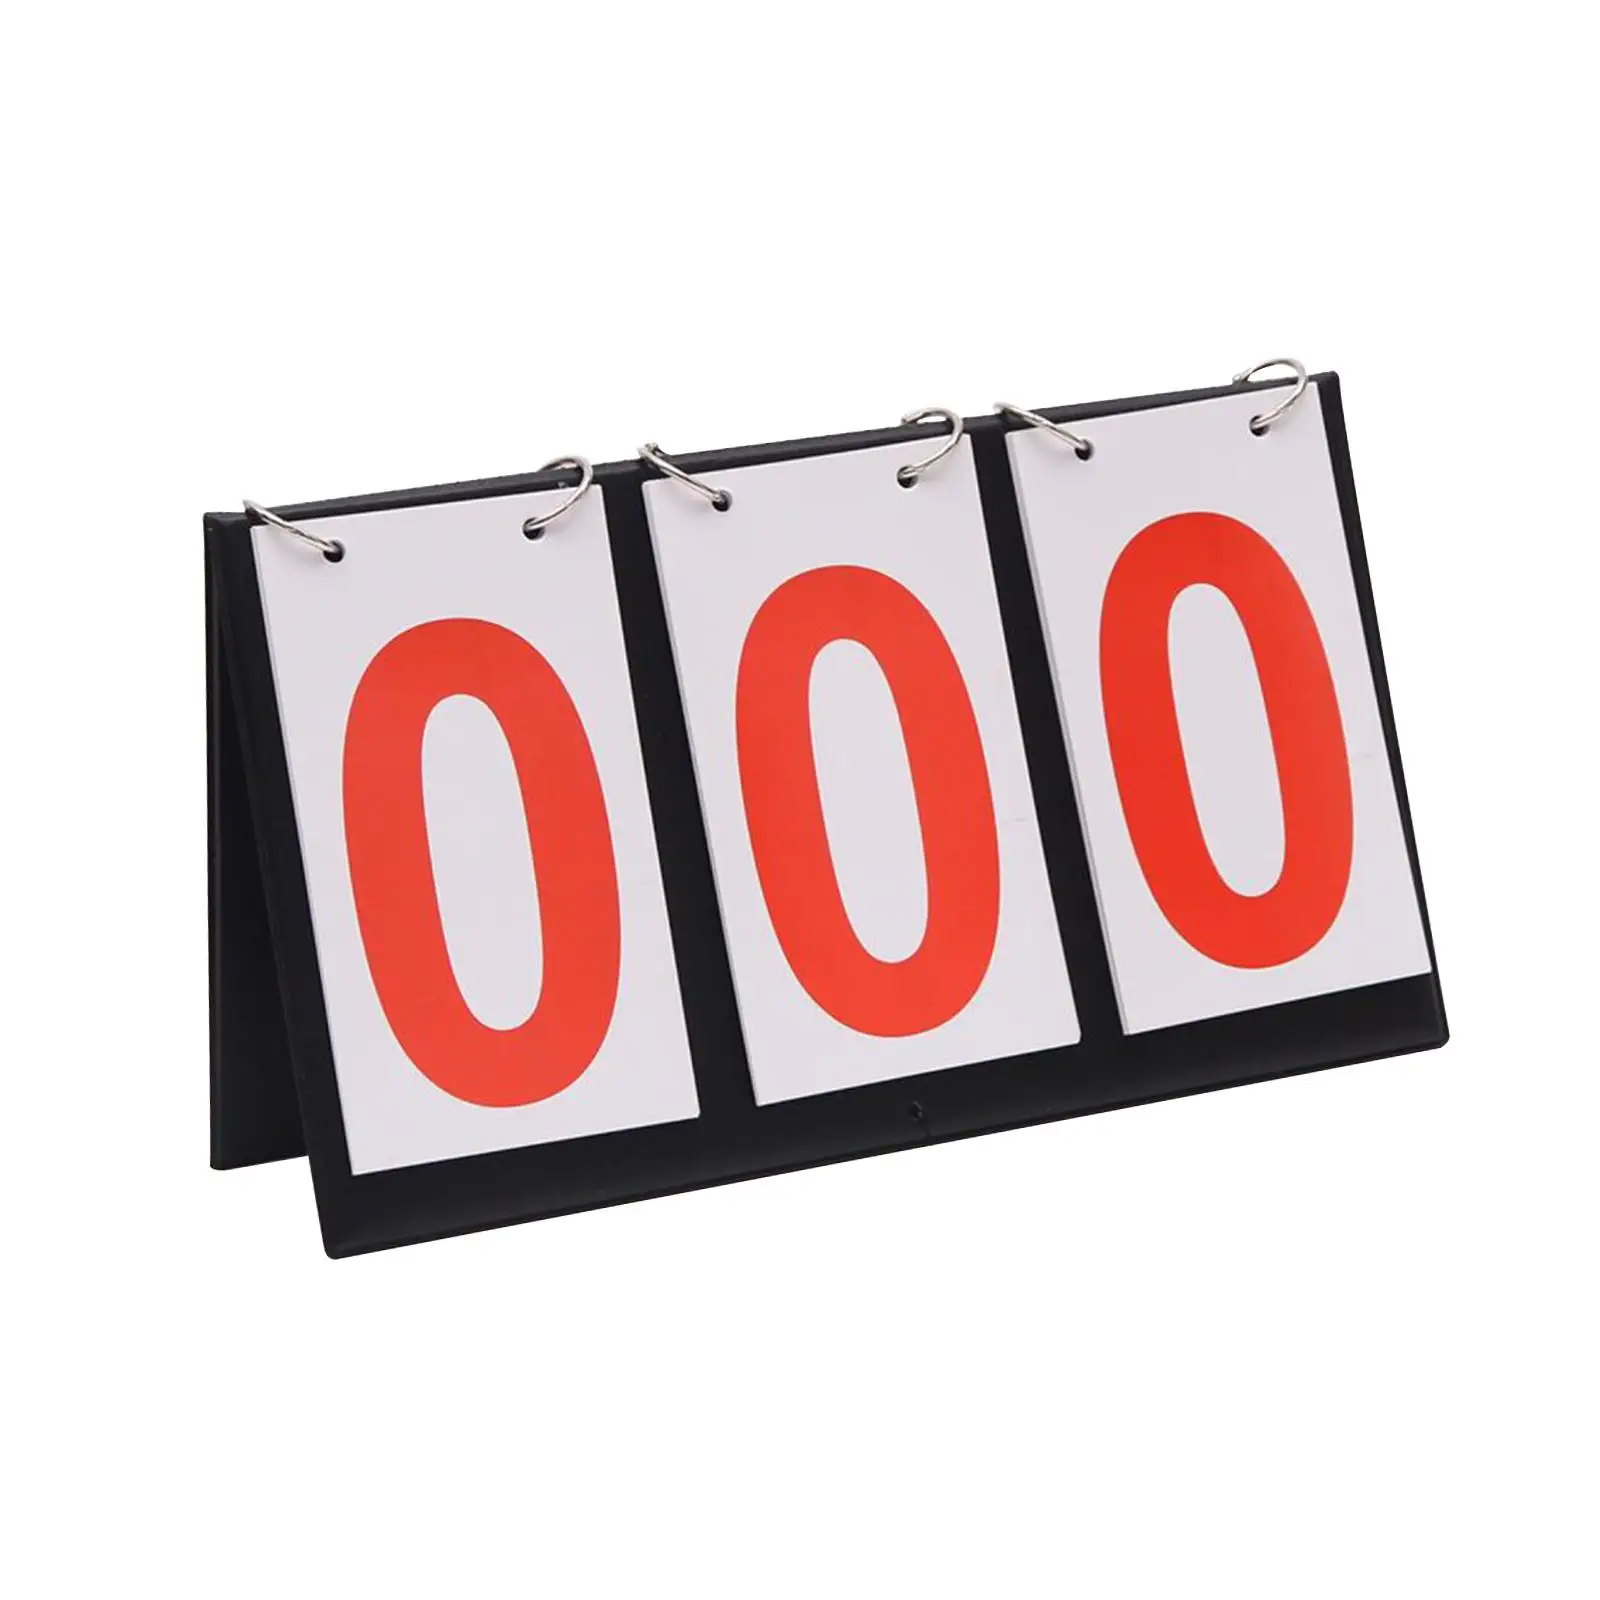 Table Top Scoreboard Soccer Referee Portable Score Keeper for Indoor Outdoor Sports Football Baseball Pingpong Ball Volleyball